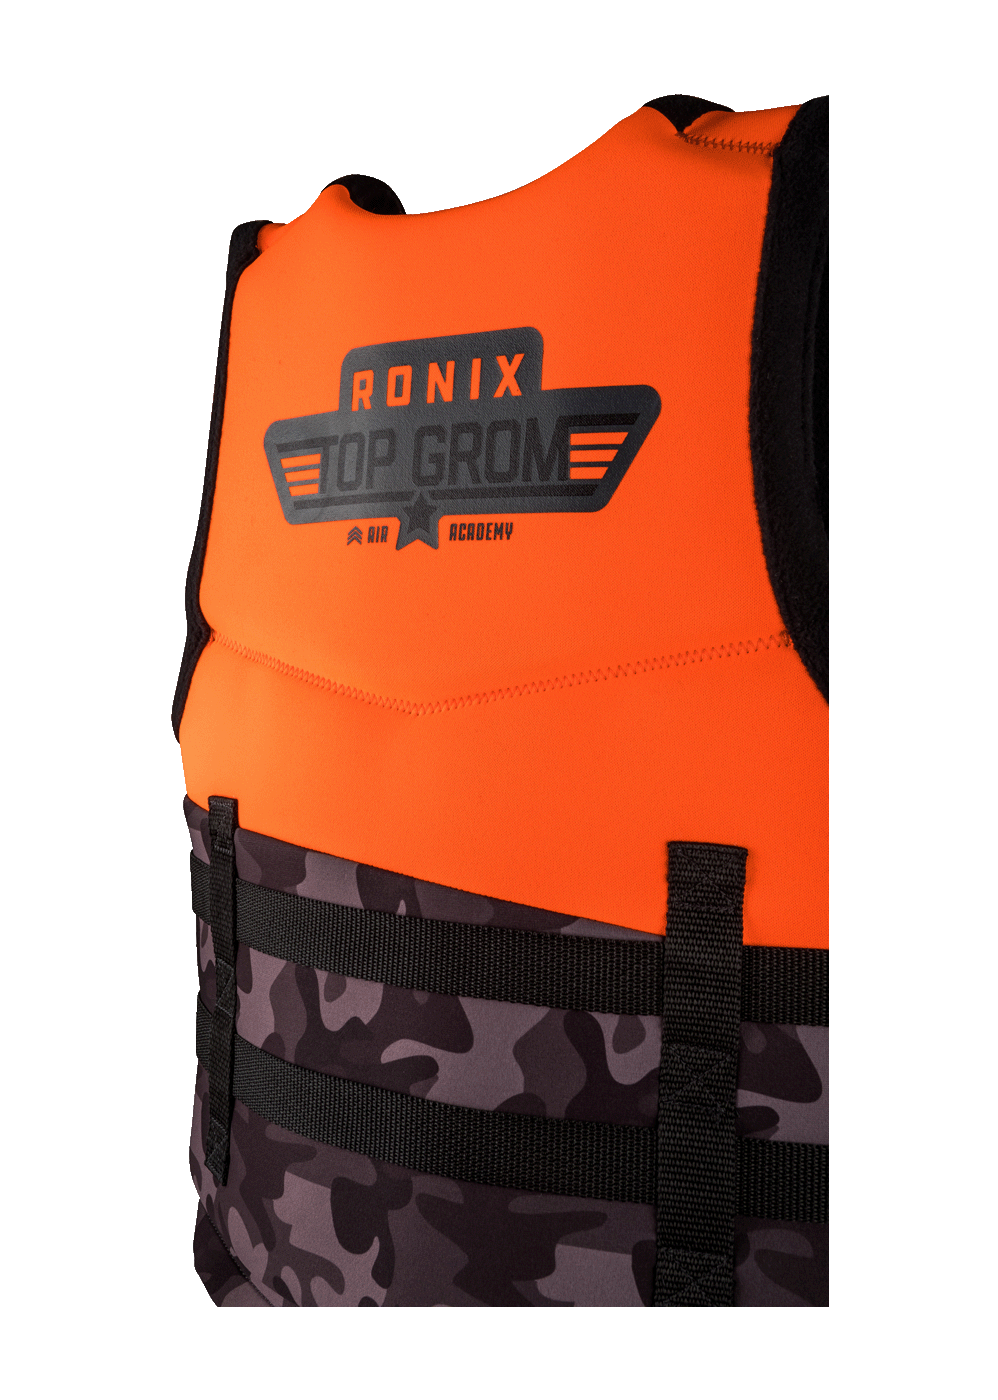 2022 Ronix Vests CGA Top Grom Youth Inset 6 copy